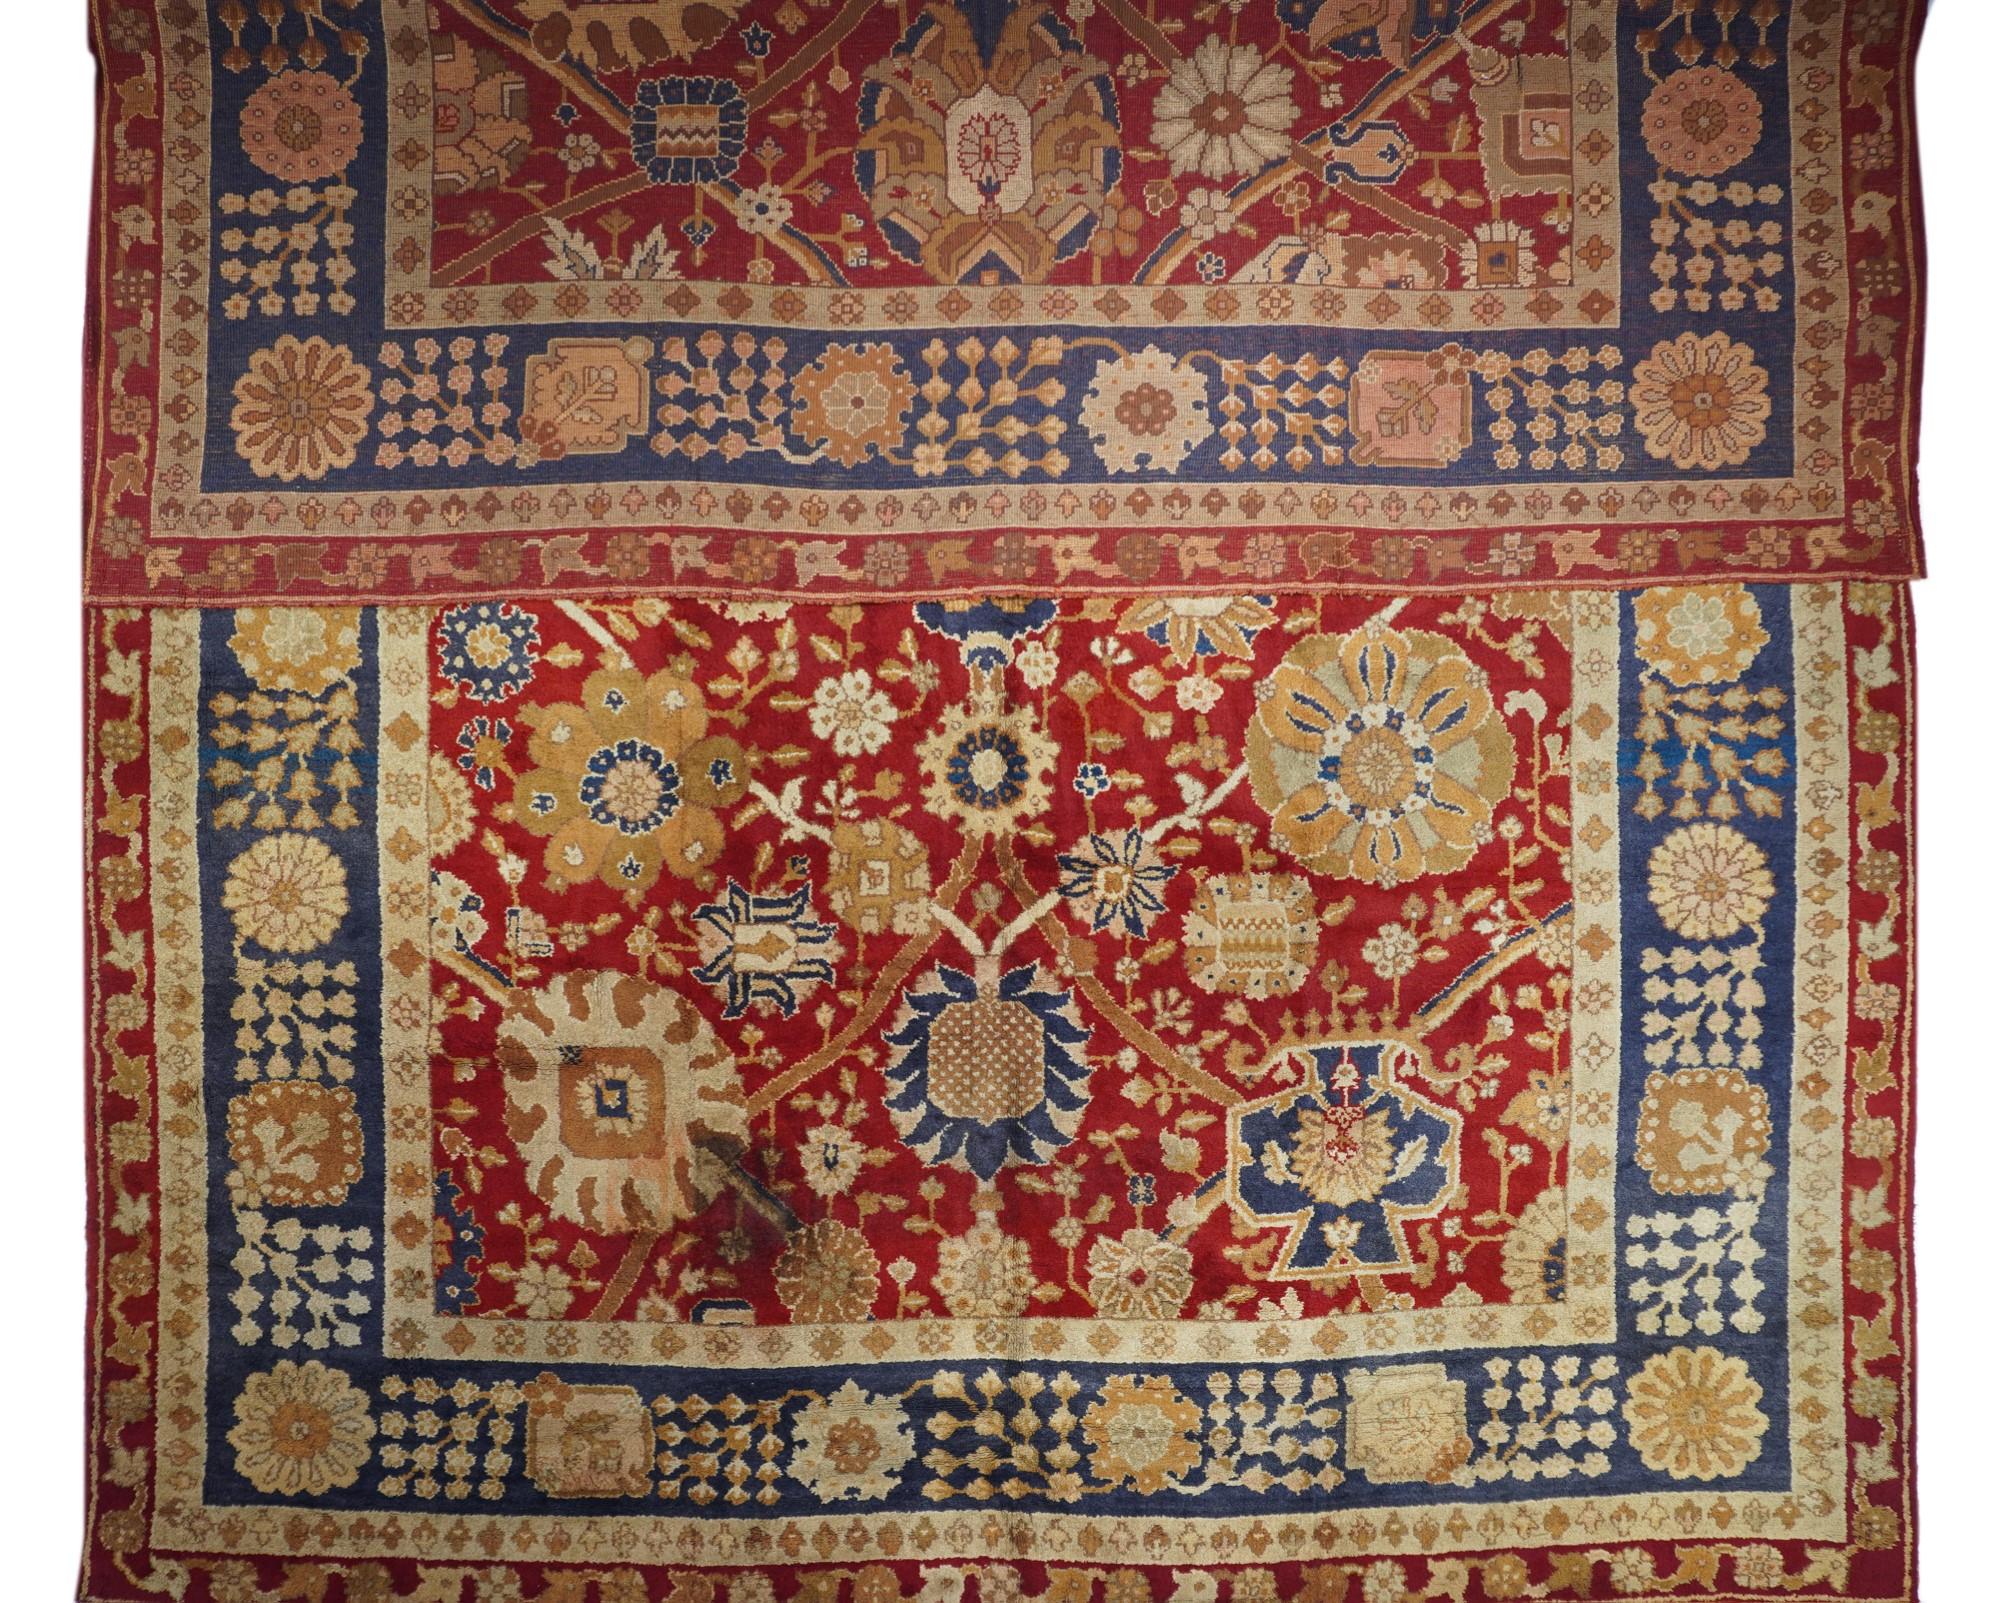 This is a particularly bold and well-rendered close-up of a 17th century “Vase carpet” design on a red field, with a vase, round, oval and petal palmettes, and a central navy escutcheon, tied together by a two level lozenge straight arabesqueries.